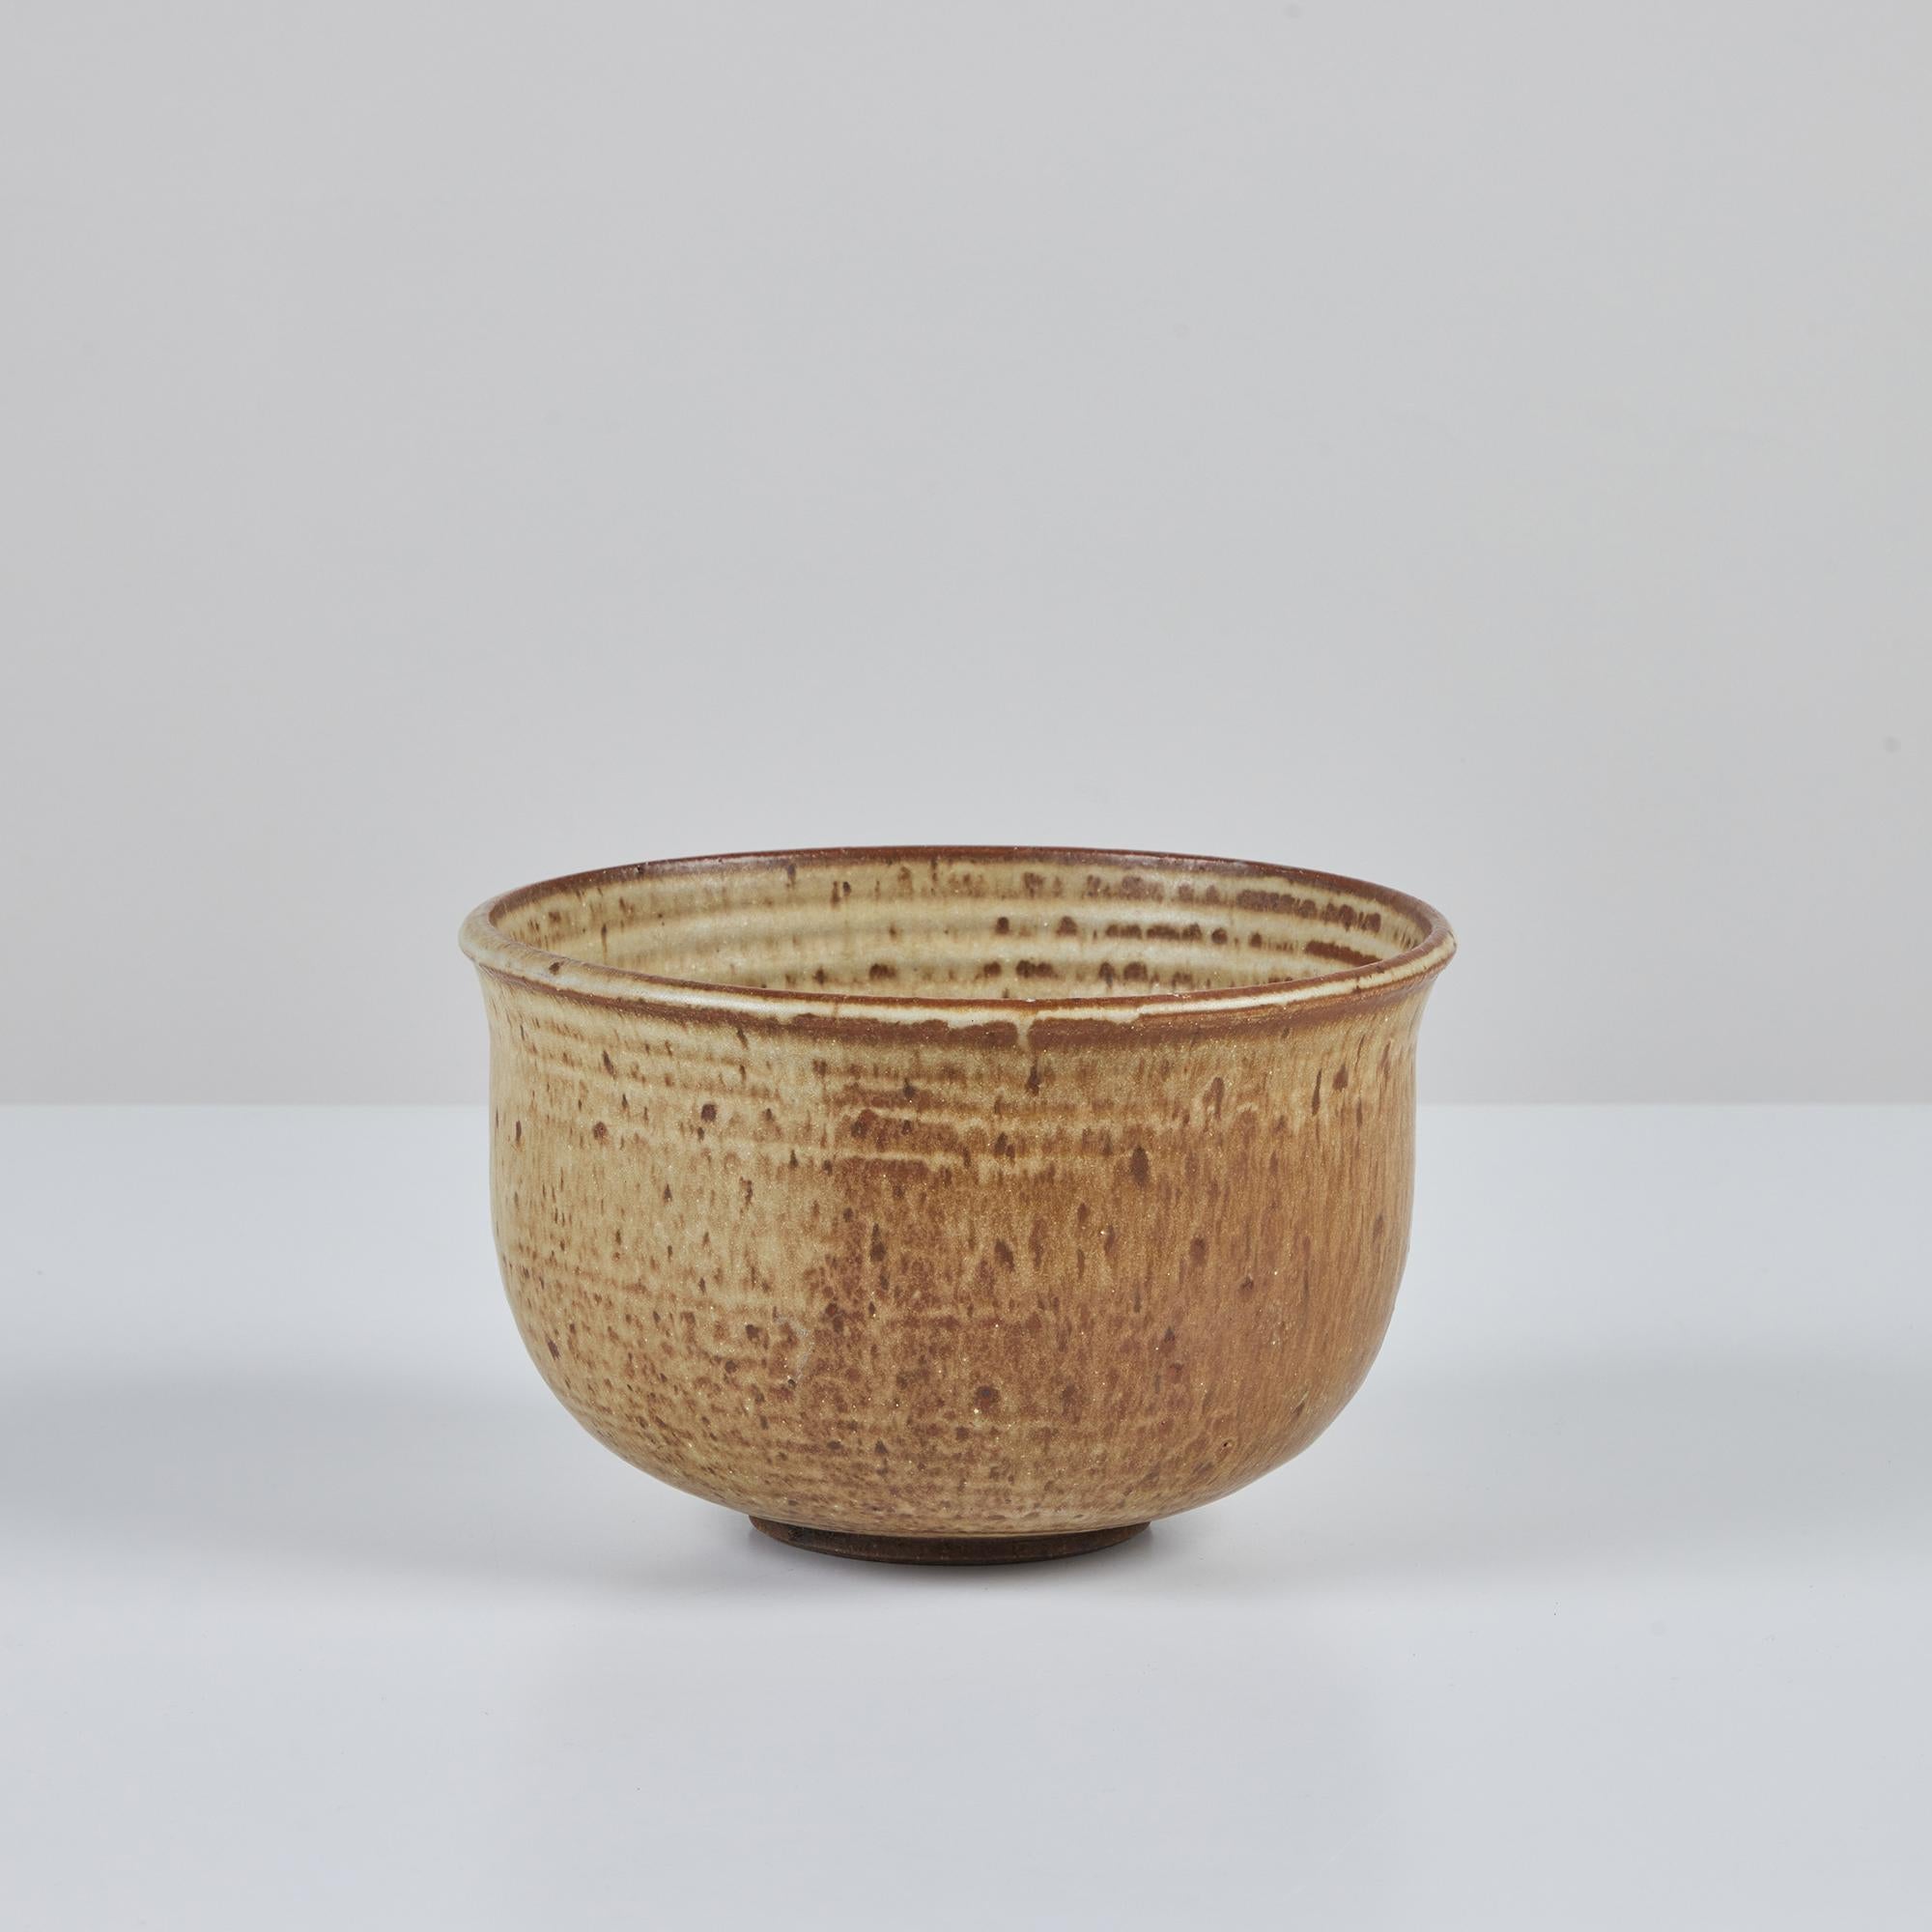 Hand thrown studio pottery planter. This example has a flared lip and round body. It is decorated with with a two tone sand and cinnamon speckled glaze all over. The interior showcases the finger grooves from the wheel on the vessels